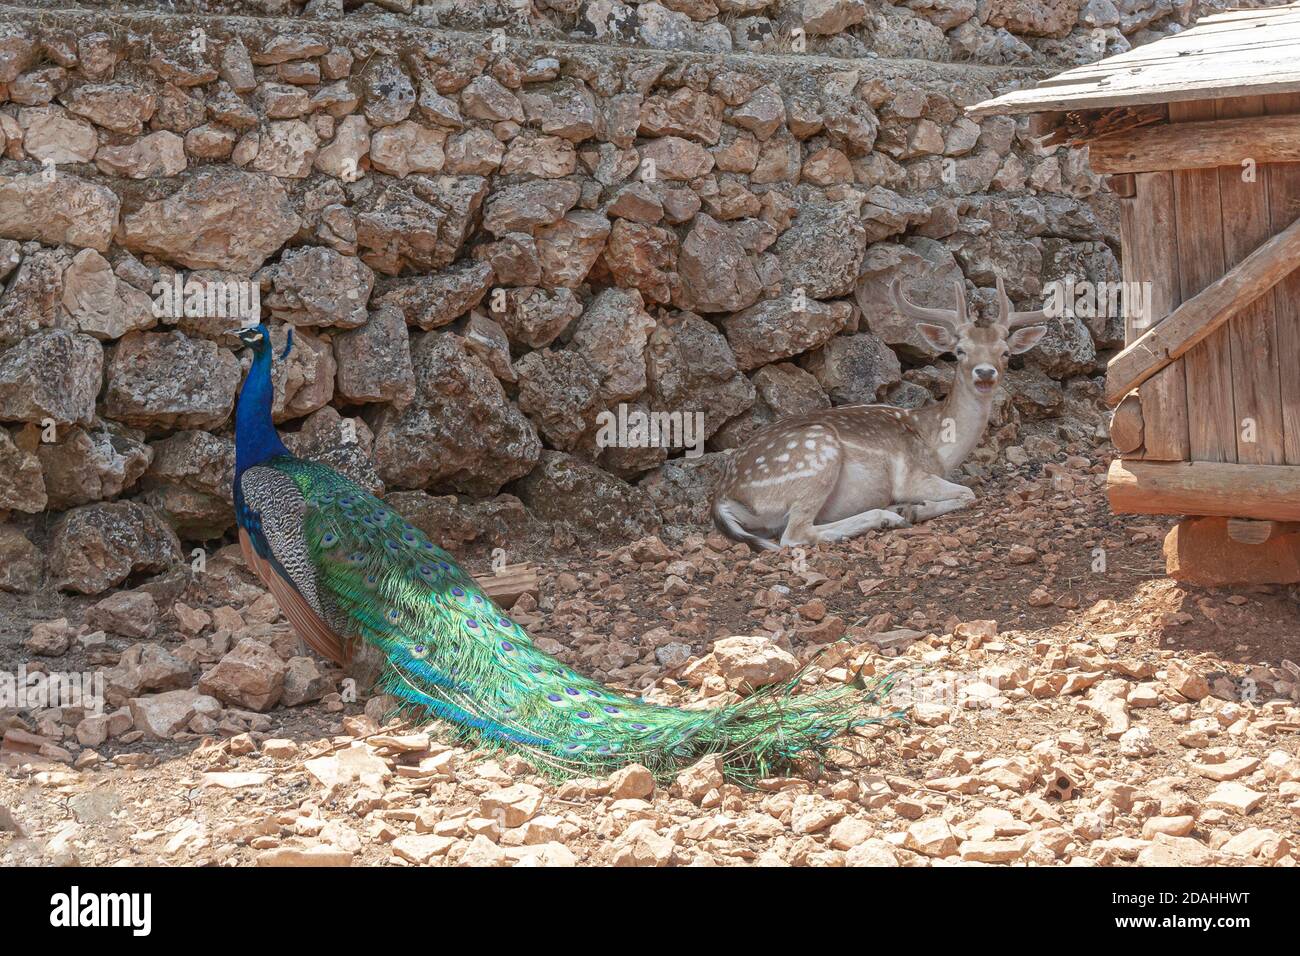 Wildlife. Peacock with colorful tail and deer near the stone wall. Stock photography Stock Photo